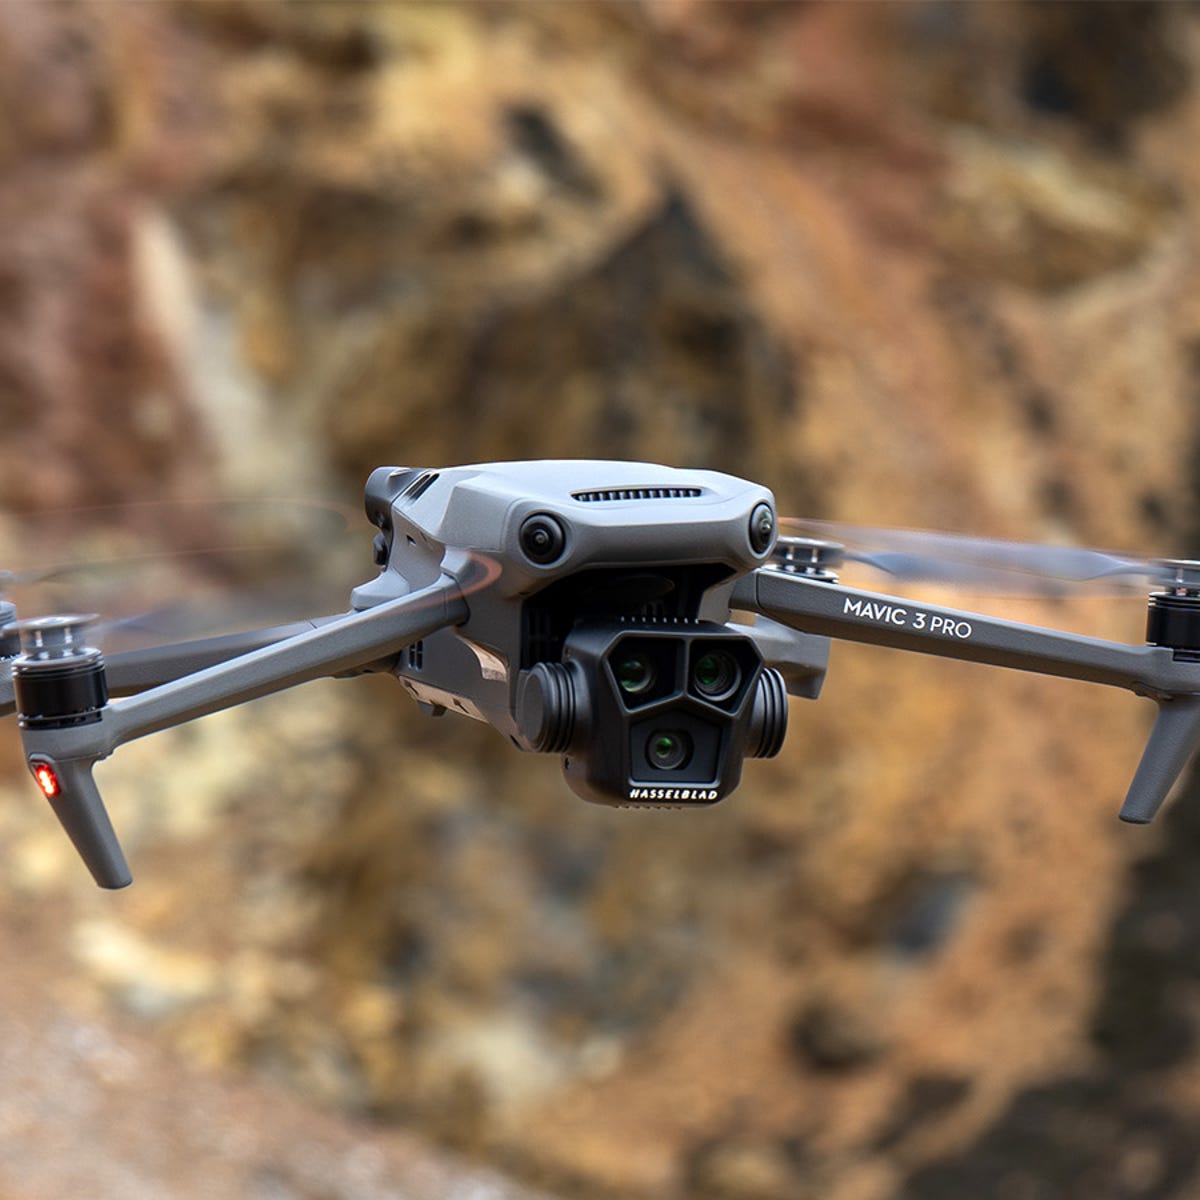 lugt design Køre ud Mavic 3 Pro: Hands-on with the best drone for content creators | ZDNET